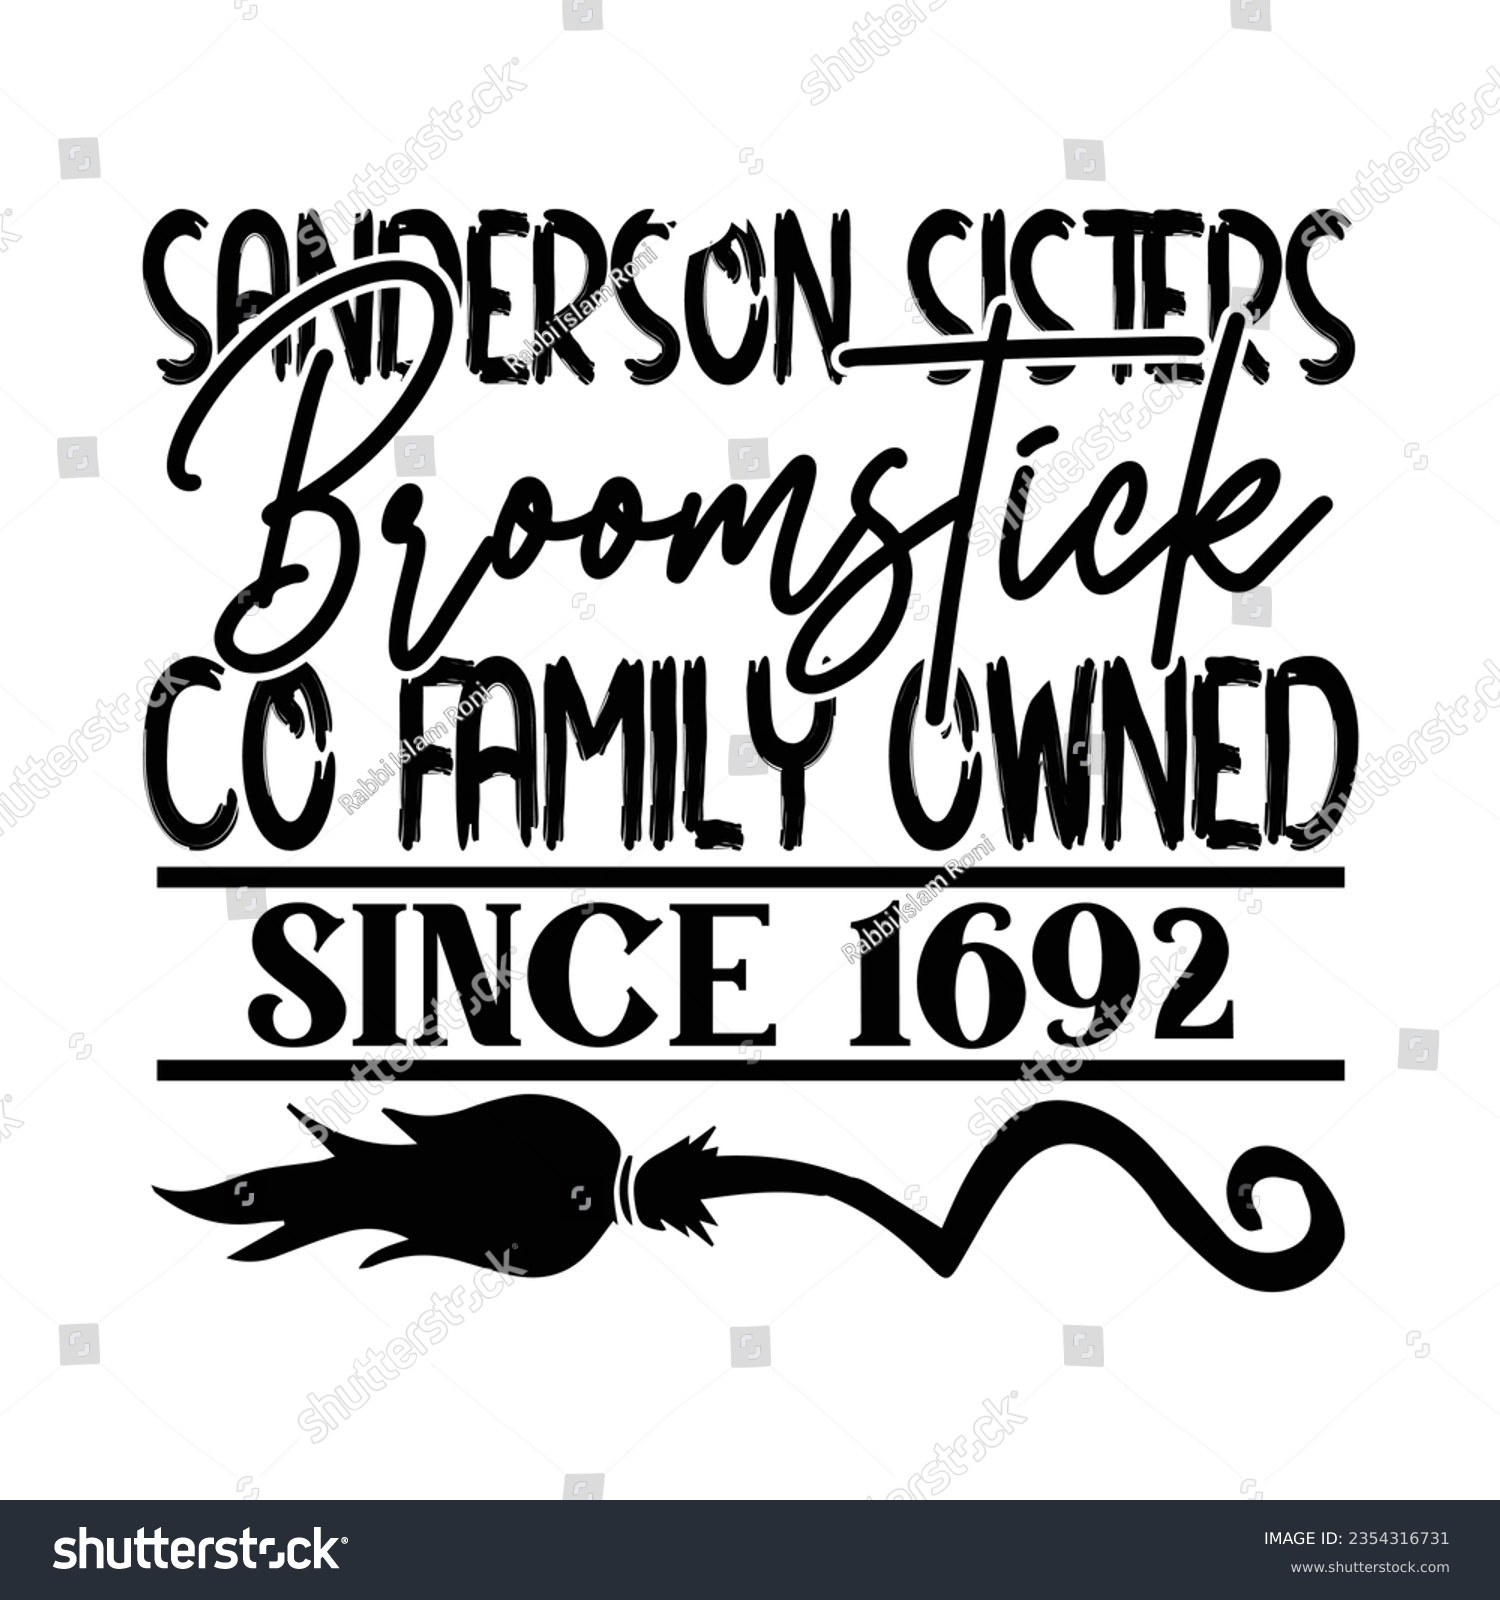 SVG of Sanderson Sisters Broomstick Co Family 0wned Since 1692, Halloween quotes SVG cut files Design svg